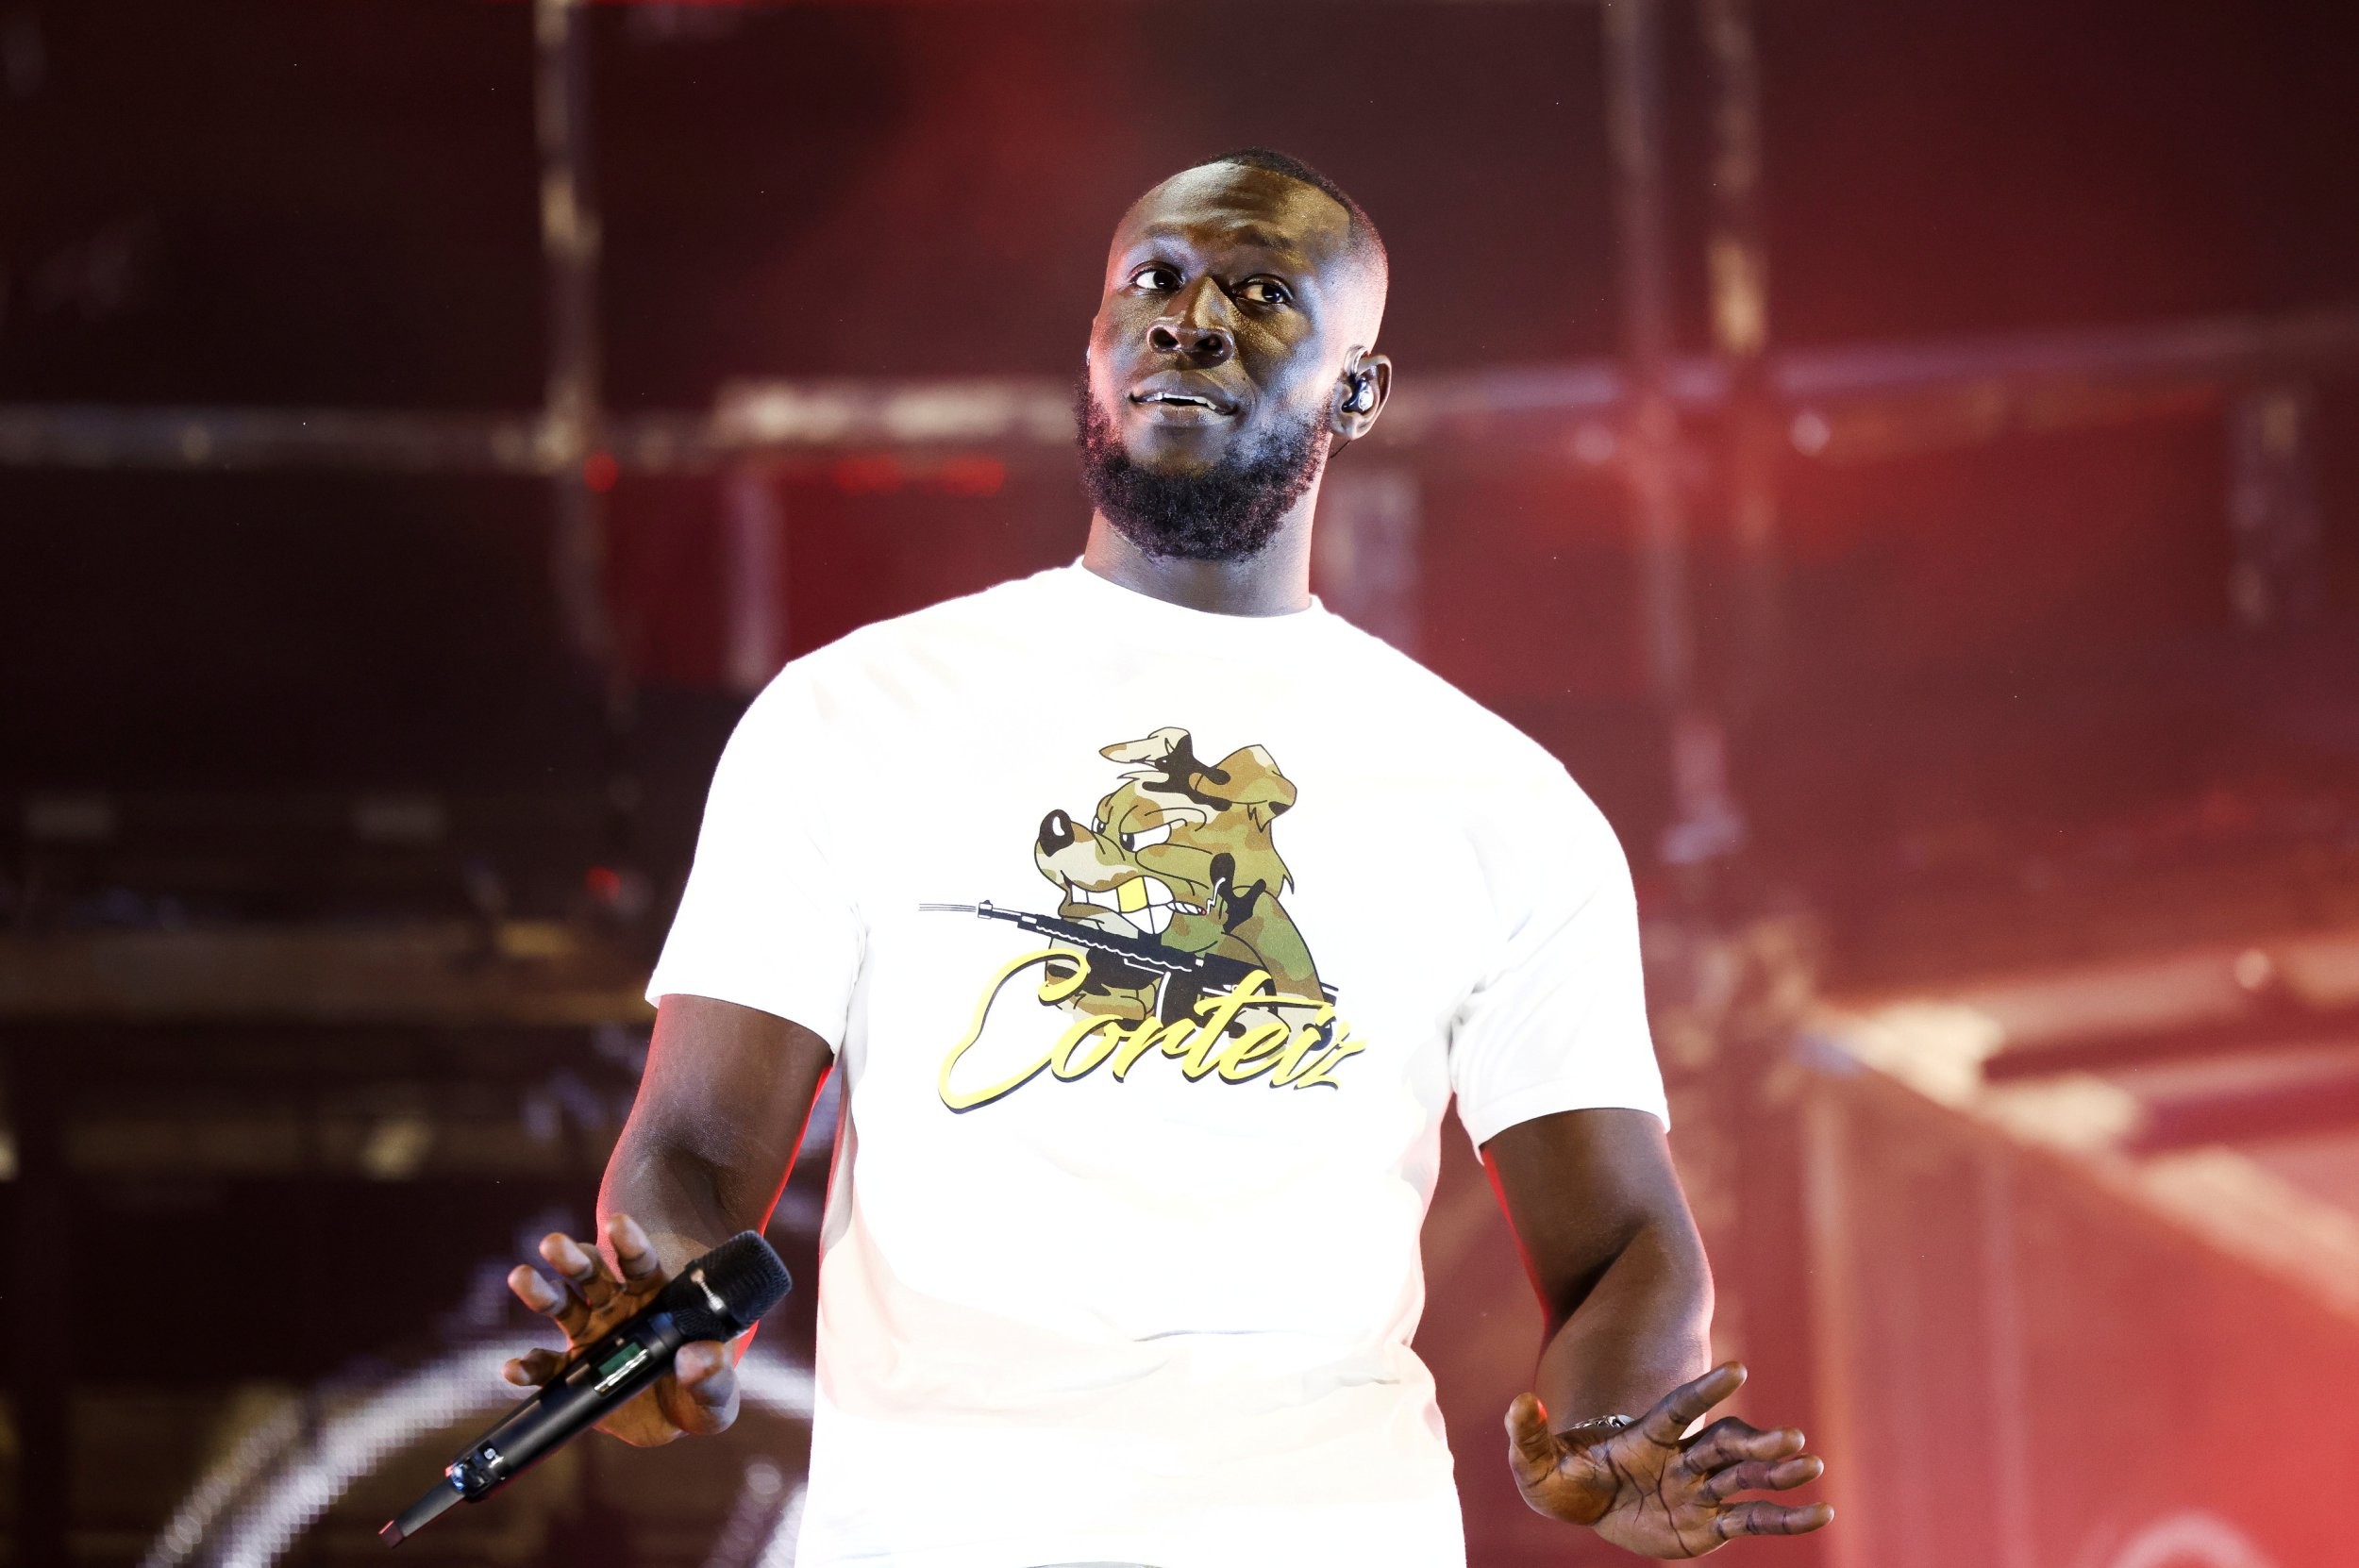 Wolves on hunt for ‘the next Stormzy’ as Premier League club launches record label